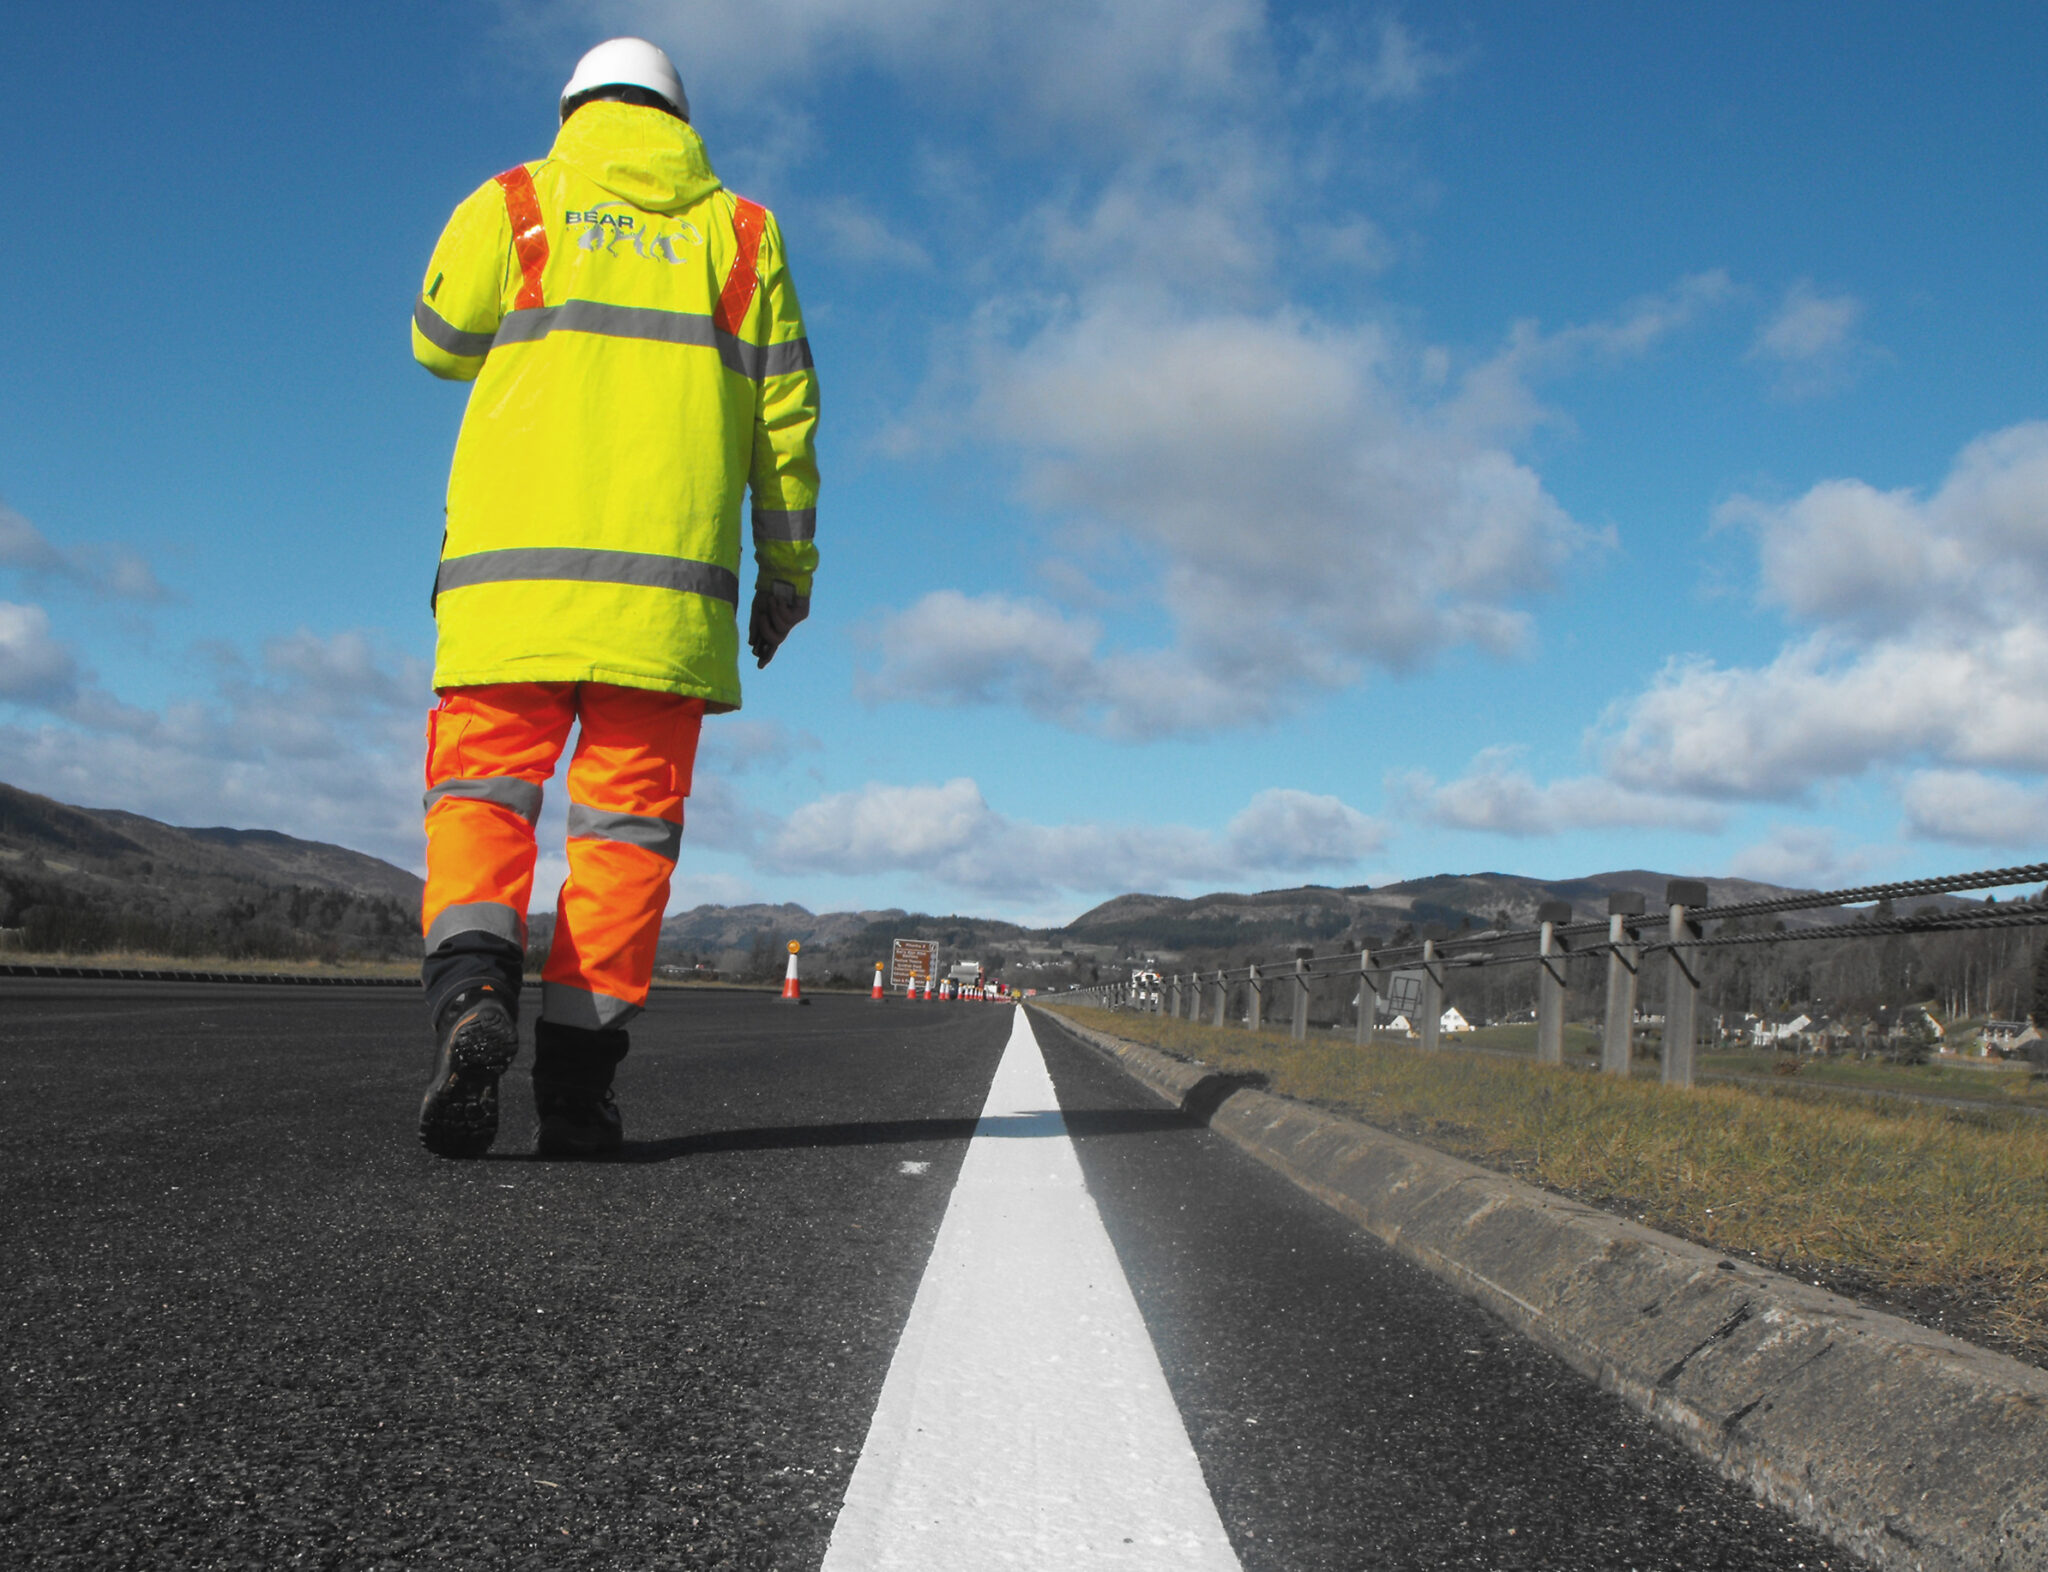 £220,000 SURFACING IMPROVEMENTS PLANNED FOR A83 NEAR LOCHGILPHEAD